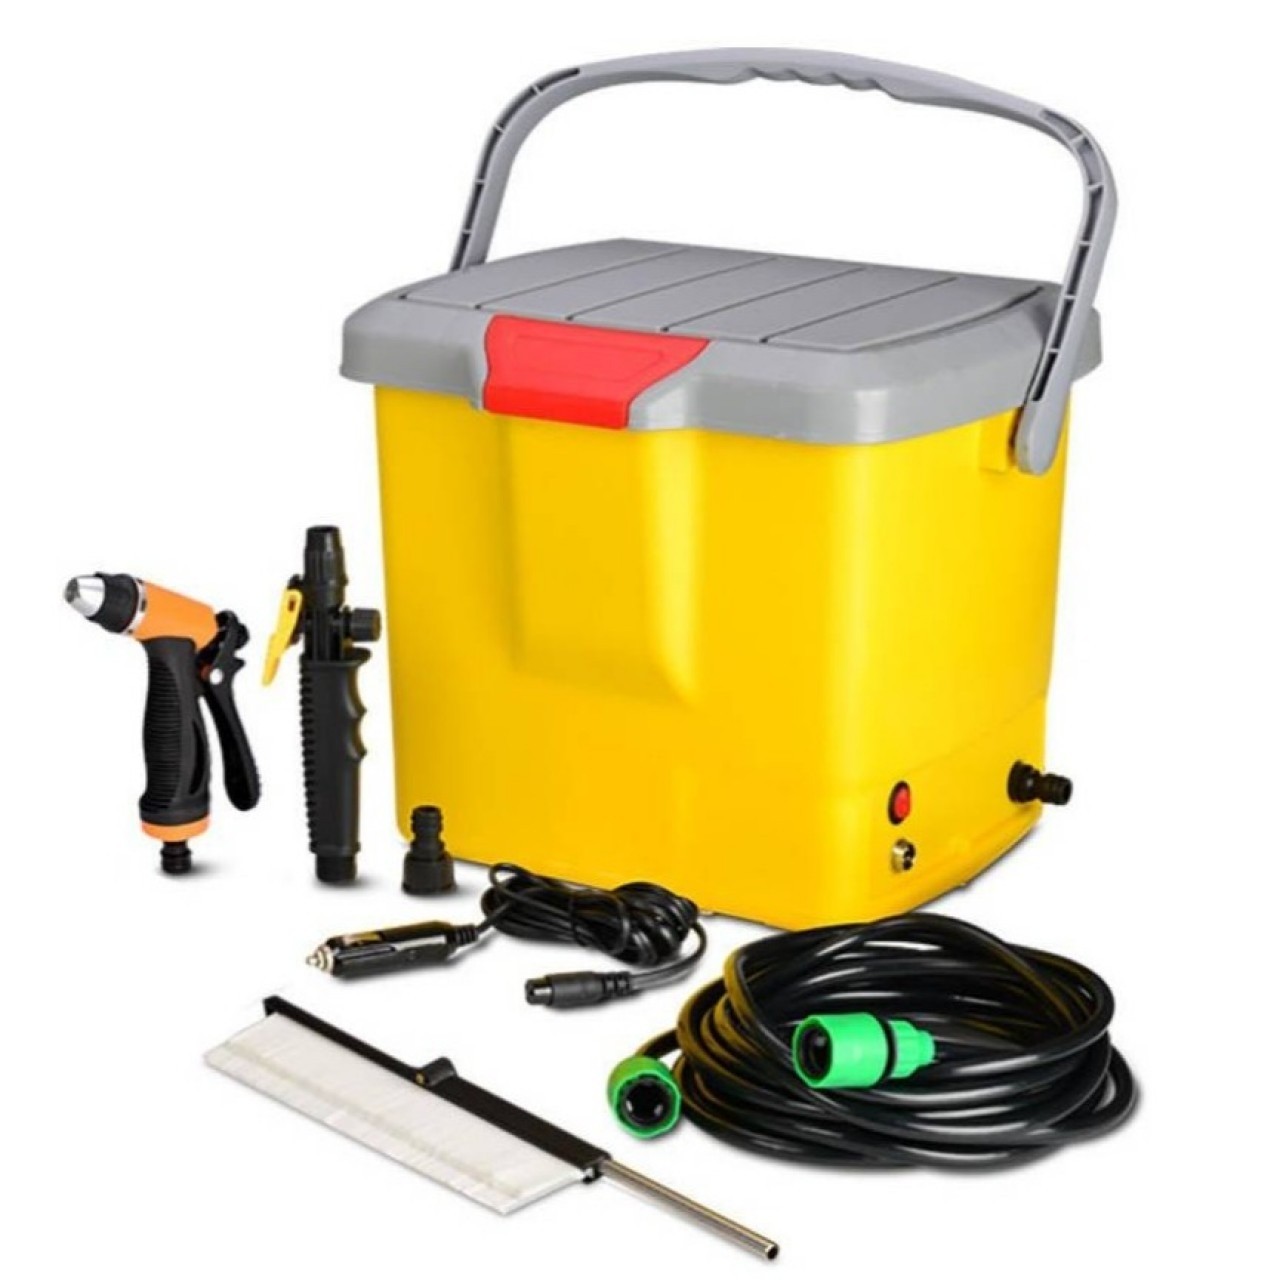 Portable Automatic Electric Car Wash Kit – Washer, Sprayer, Cleaner